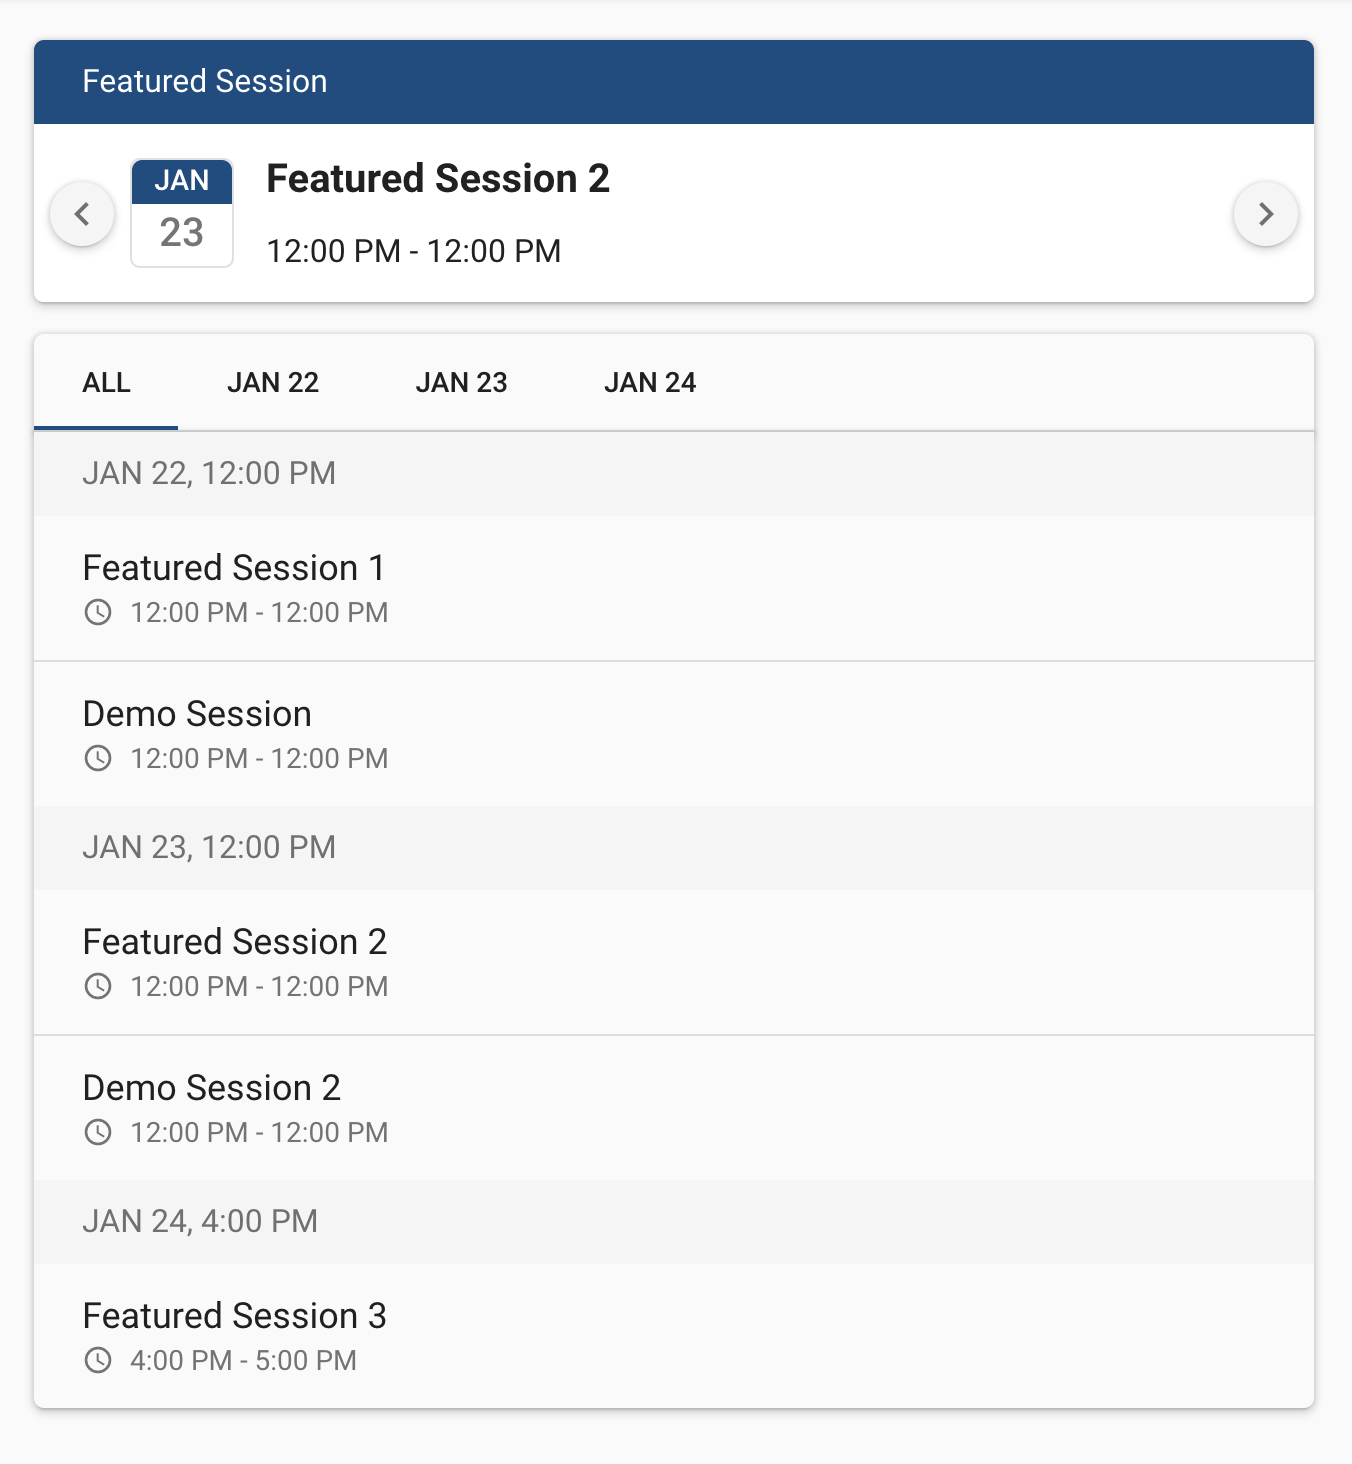 Featured Sessions